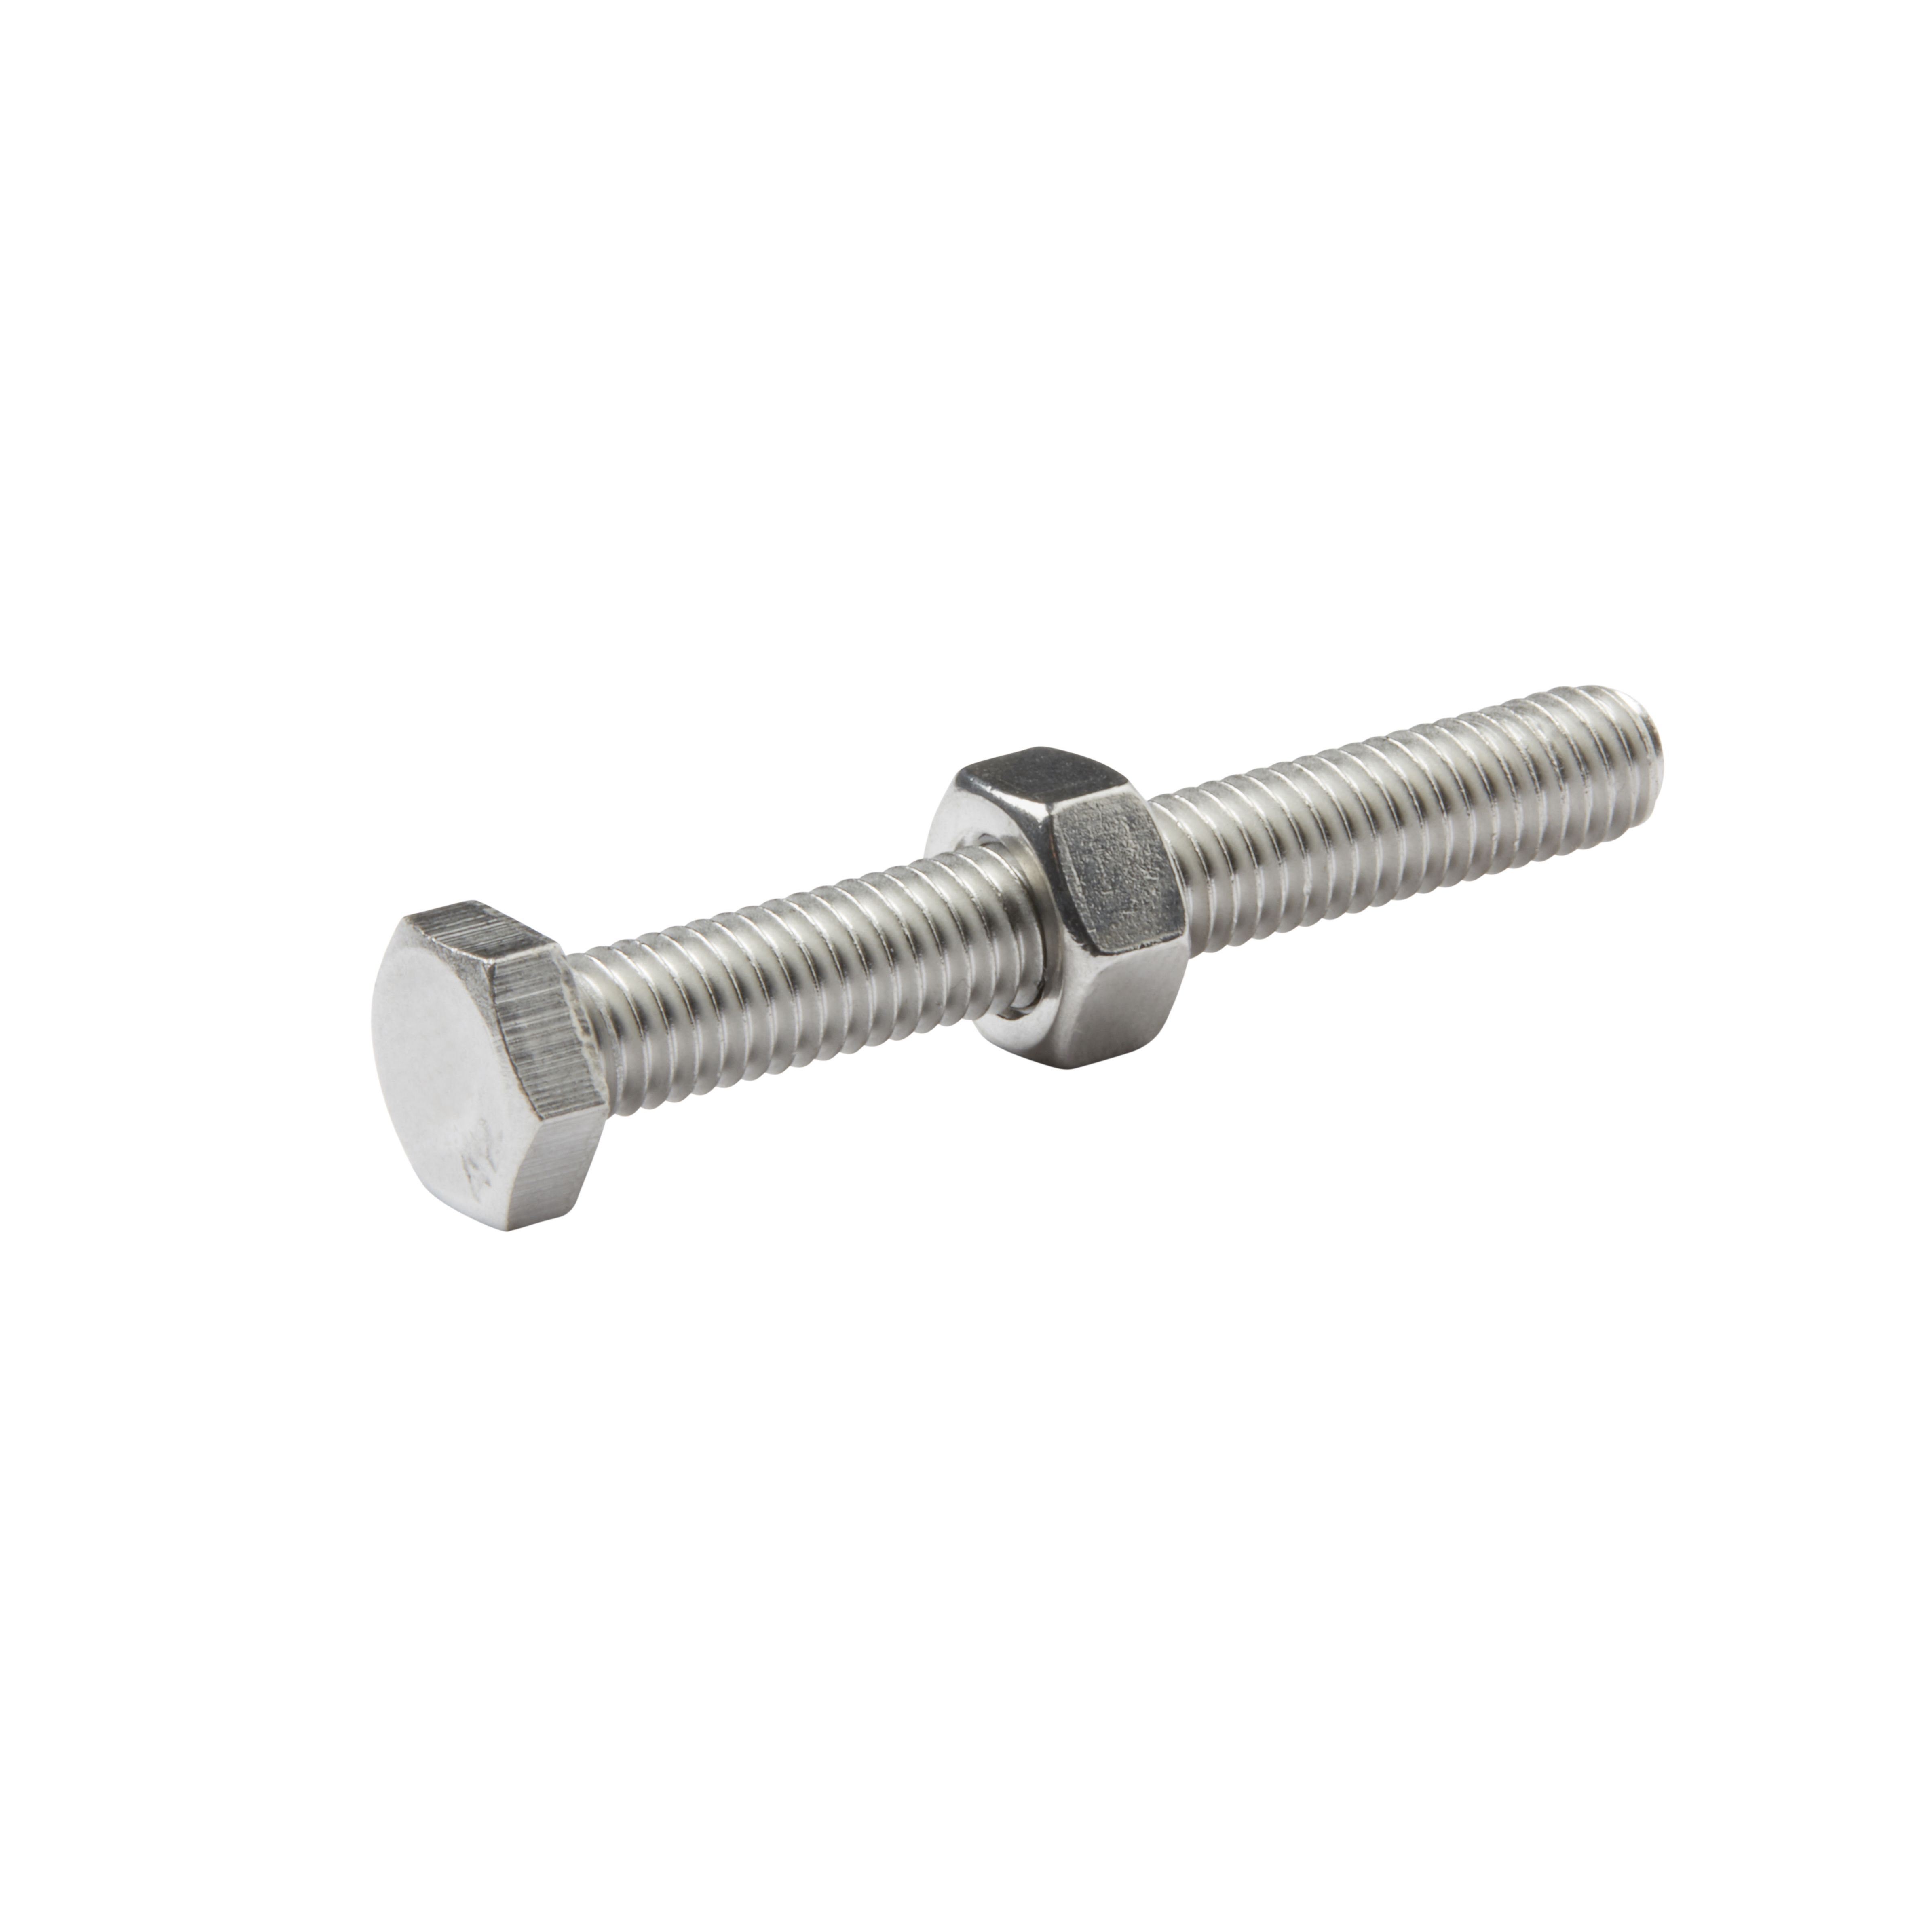 Diall M6 Hex Stainless steel Bolt & nut (L)45mm (Dia)6mm, Pack of 10